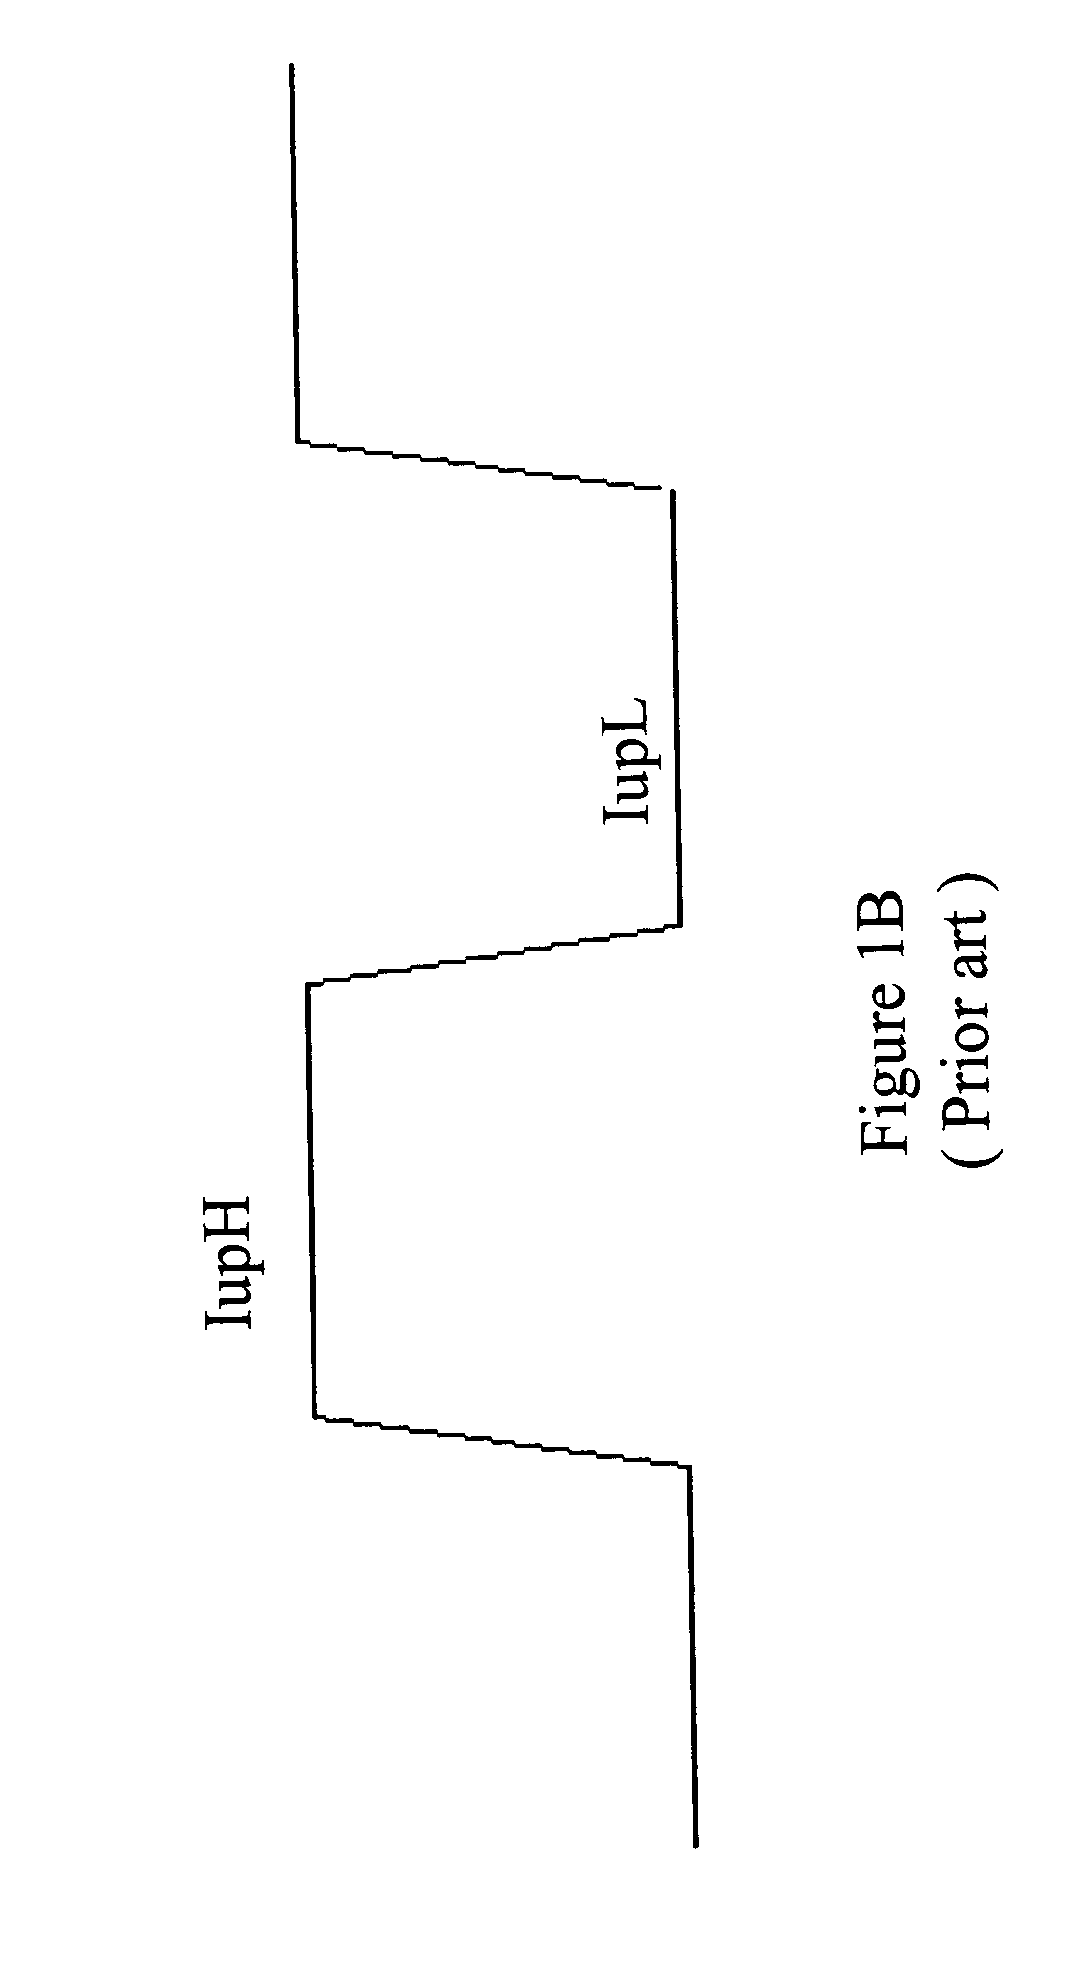 Complimentary metal oxide silicon low voltage positive emitter coupled logic buffer